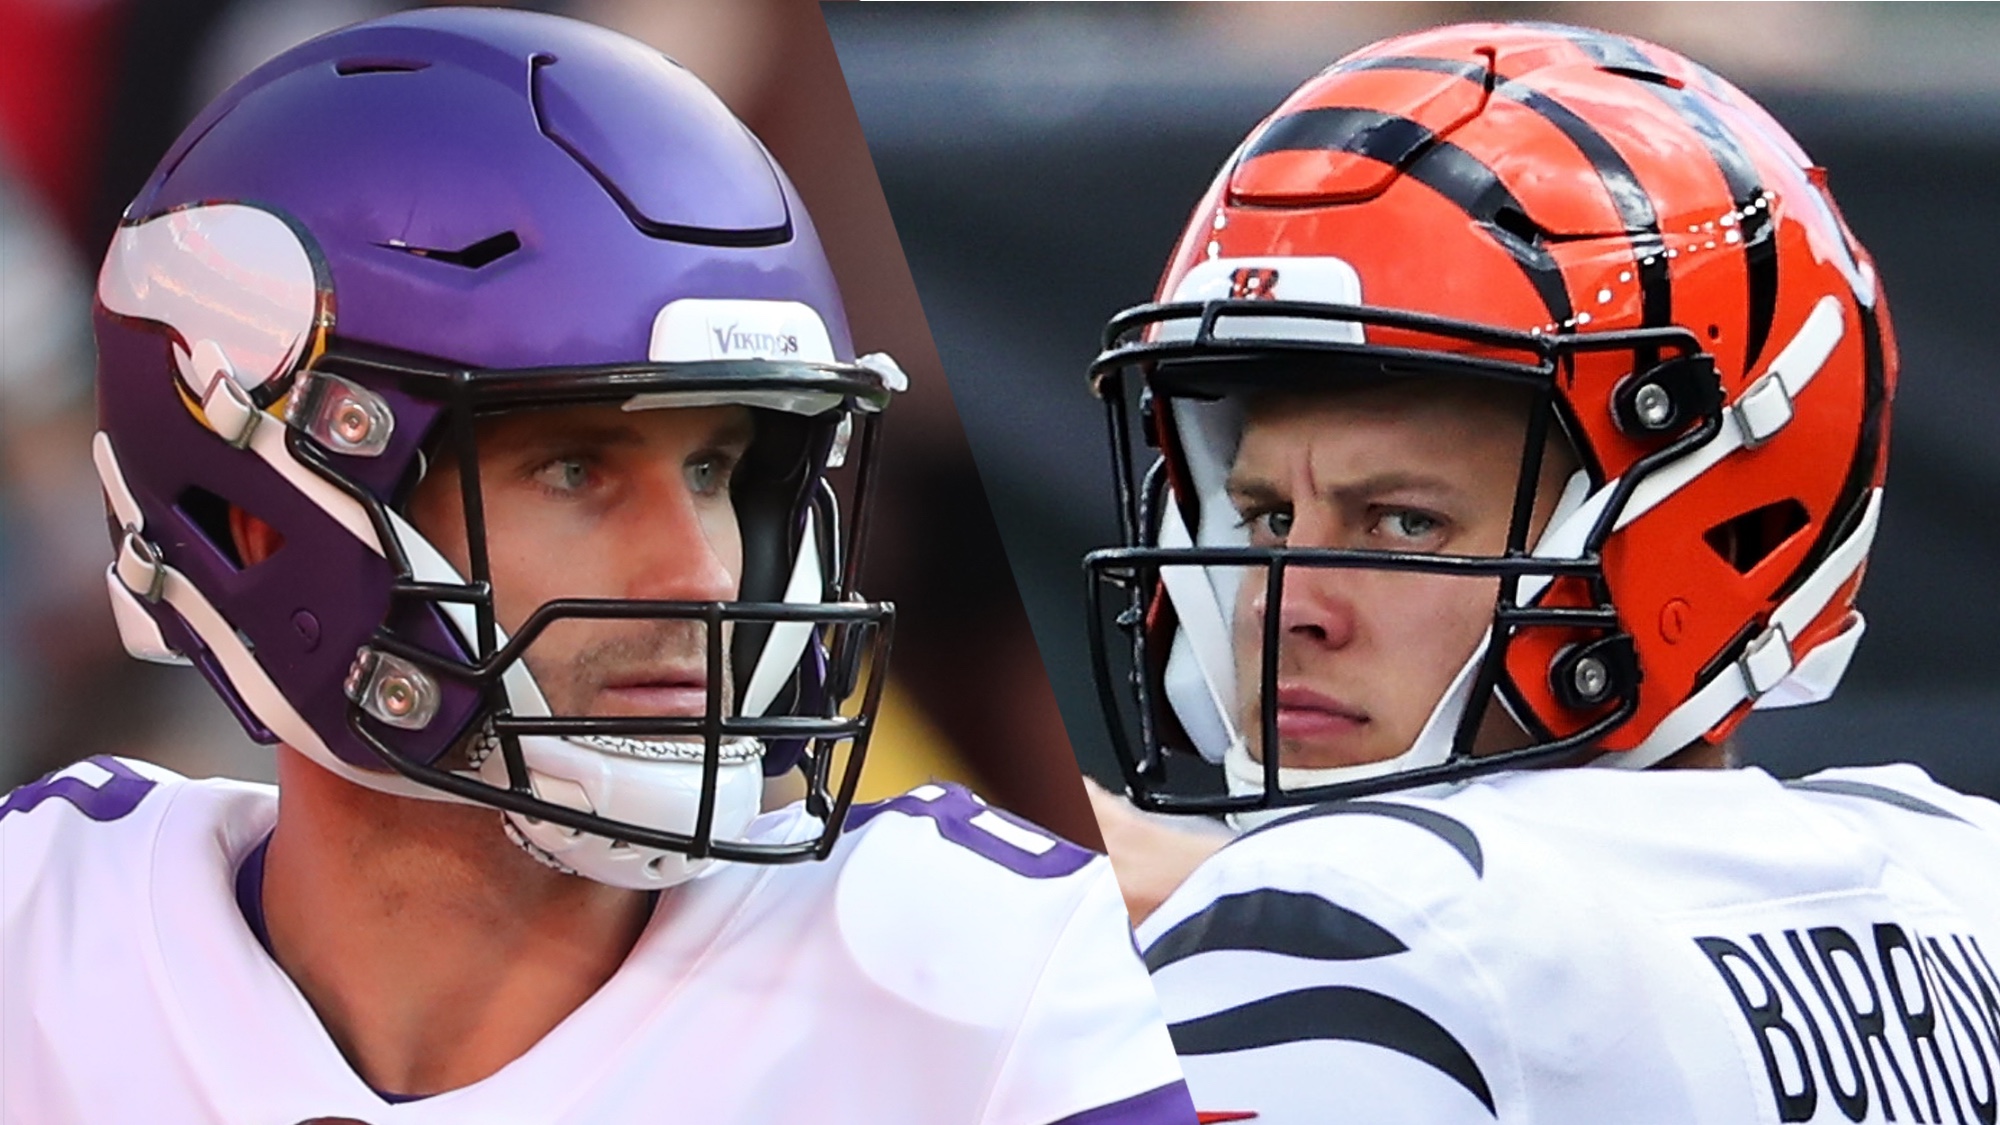 Vikings vs Bengals live stream How to watch NFL week 1 game online